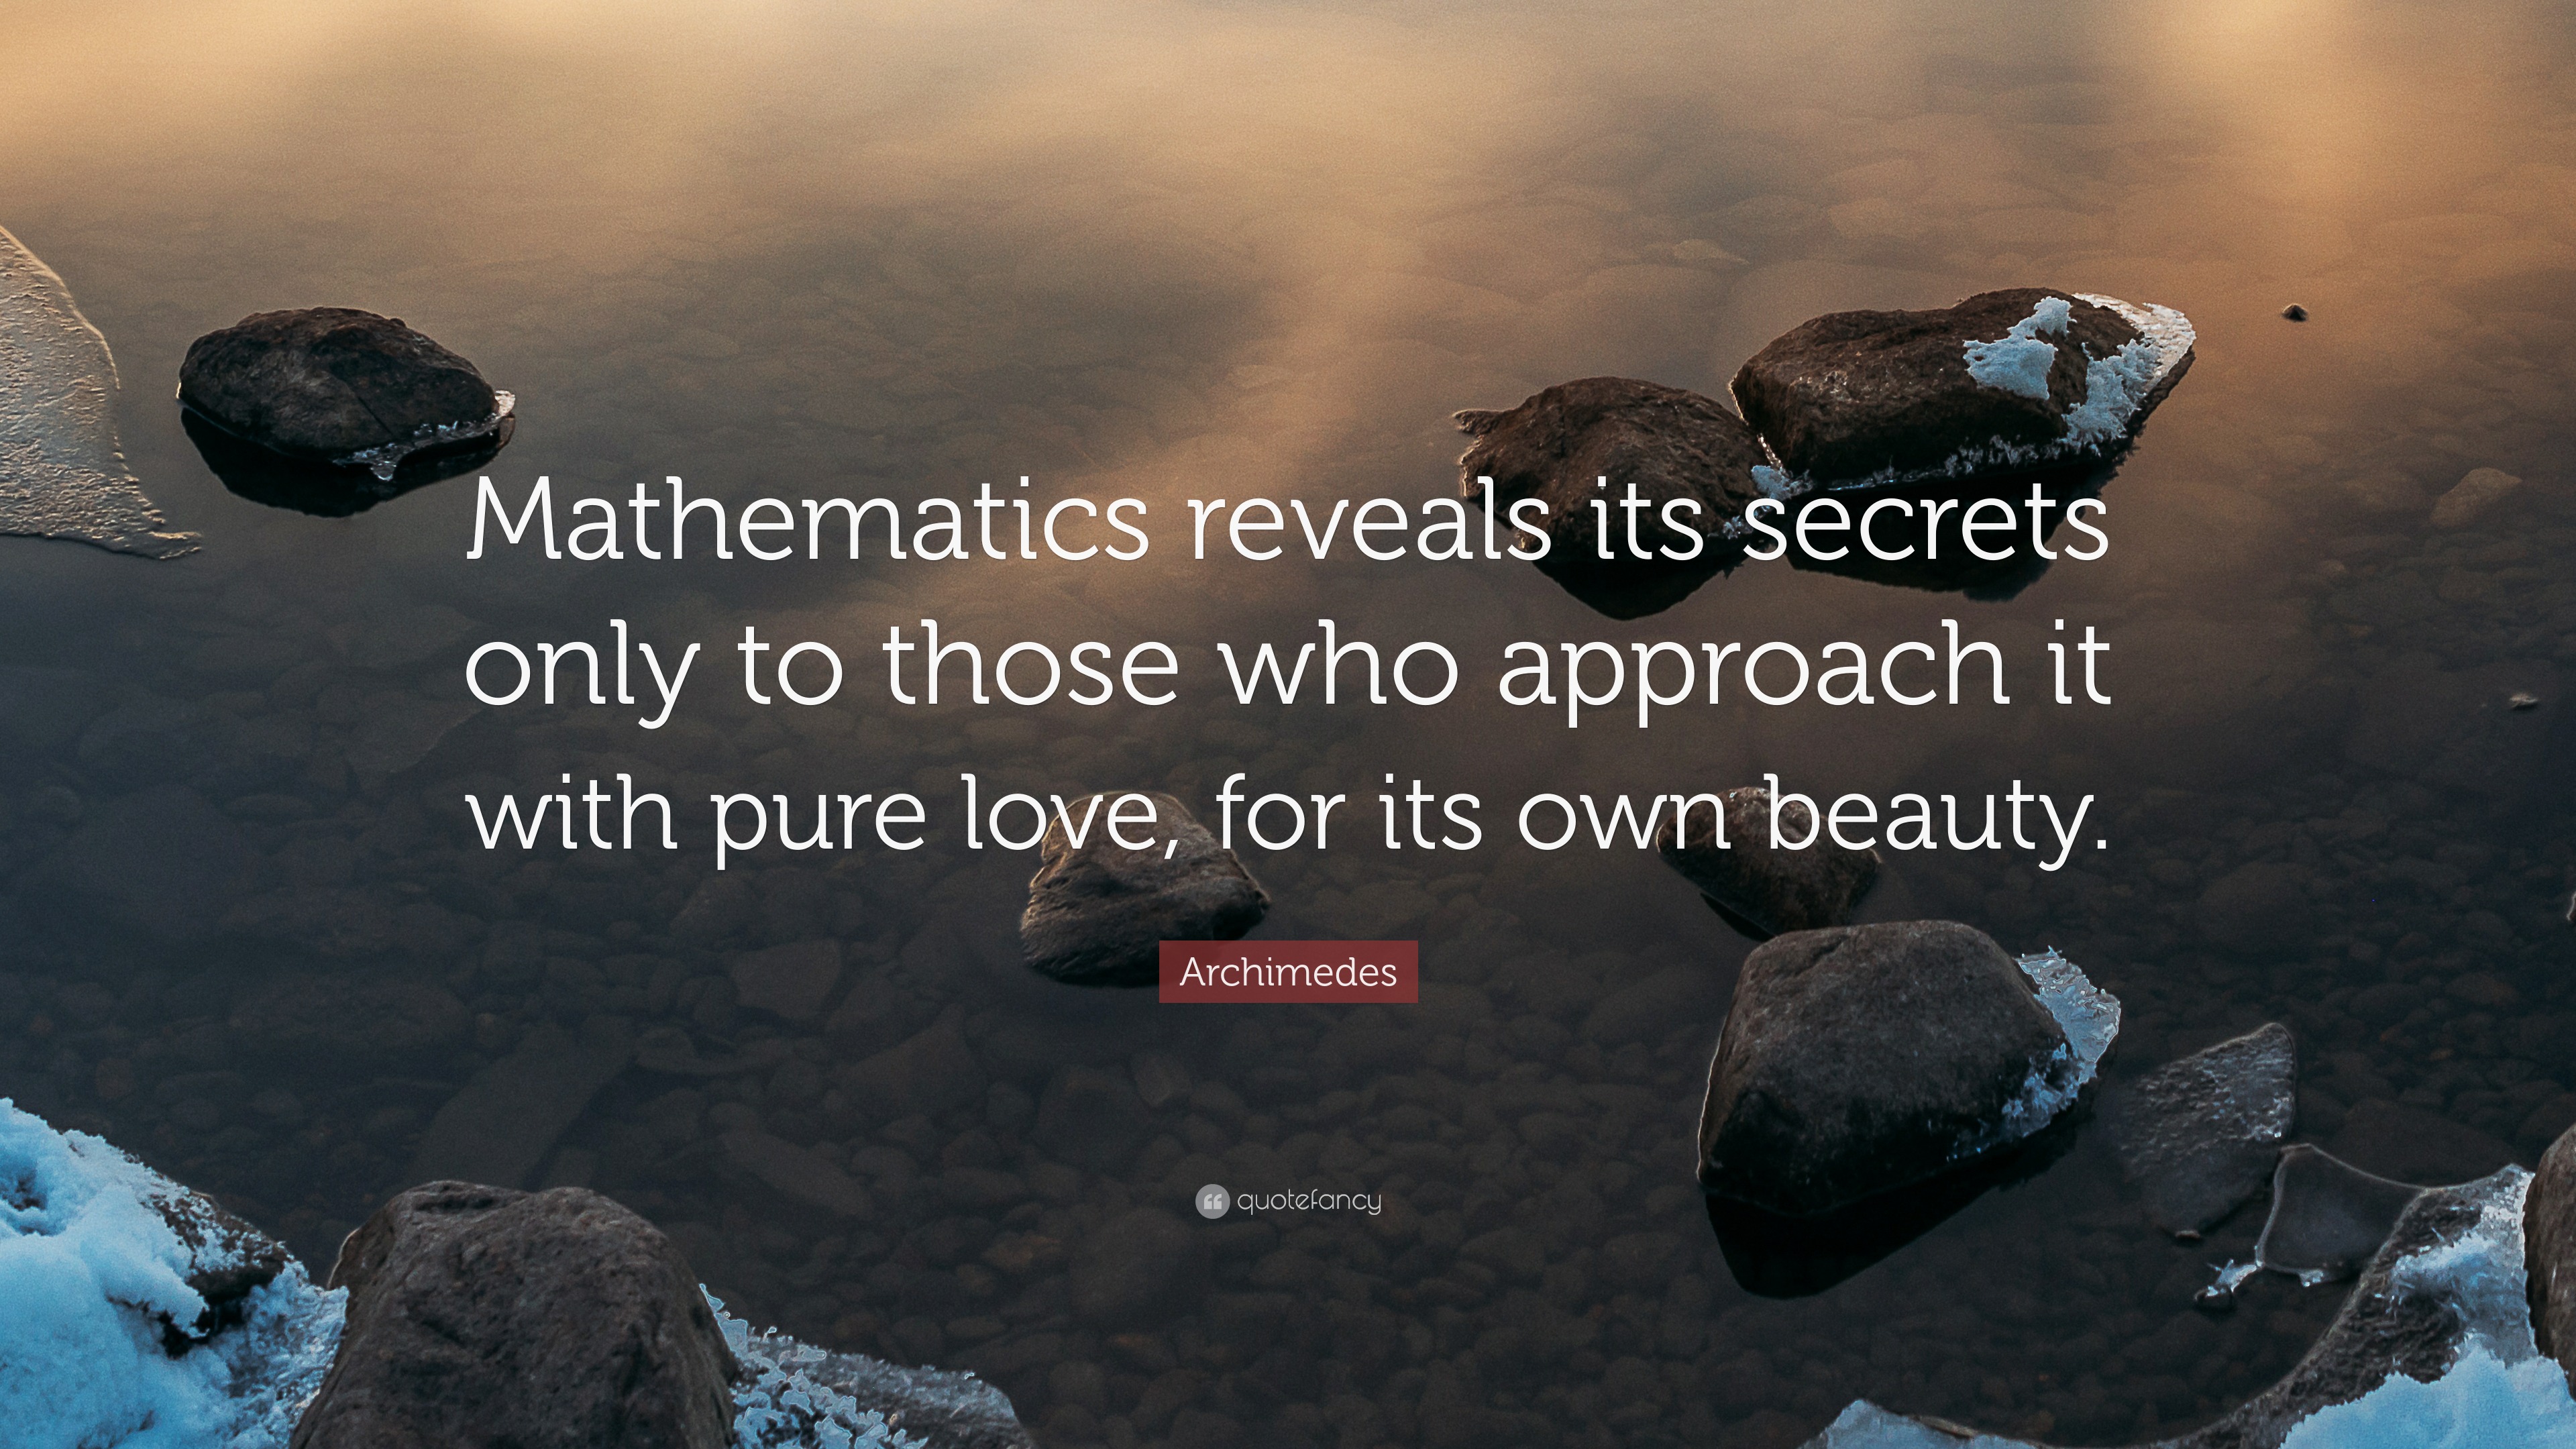 Archimedes Quote: “Mathematics reveals its secrets only to those who